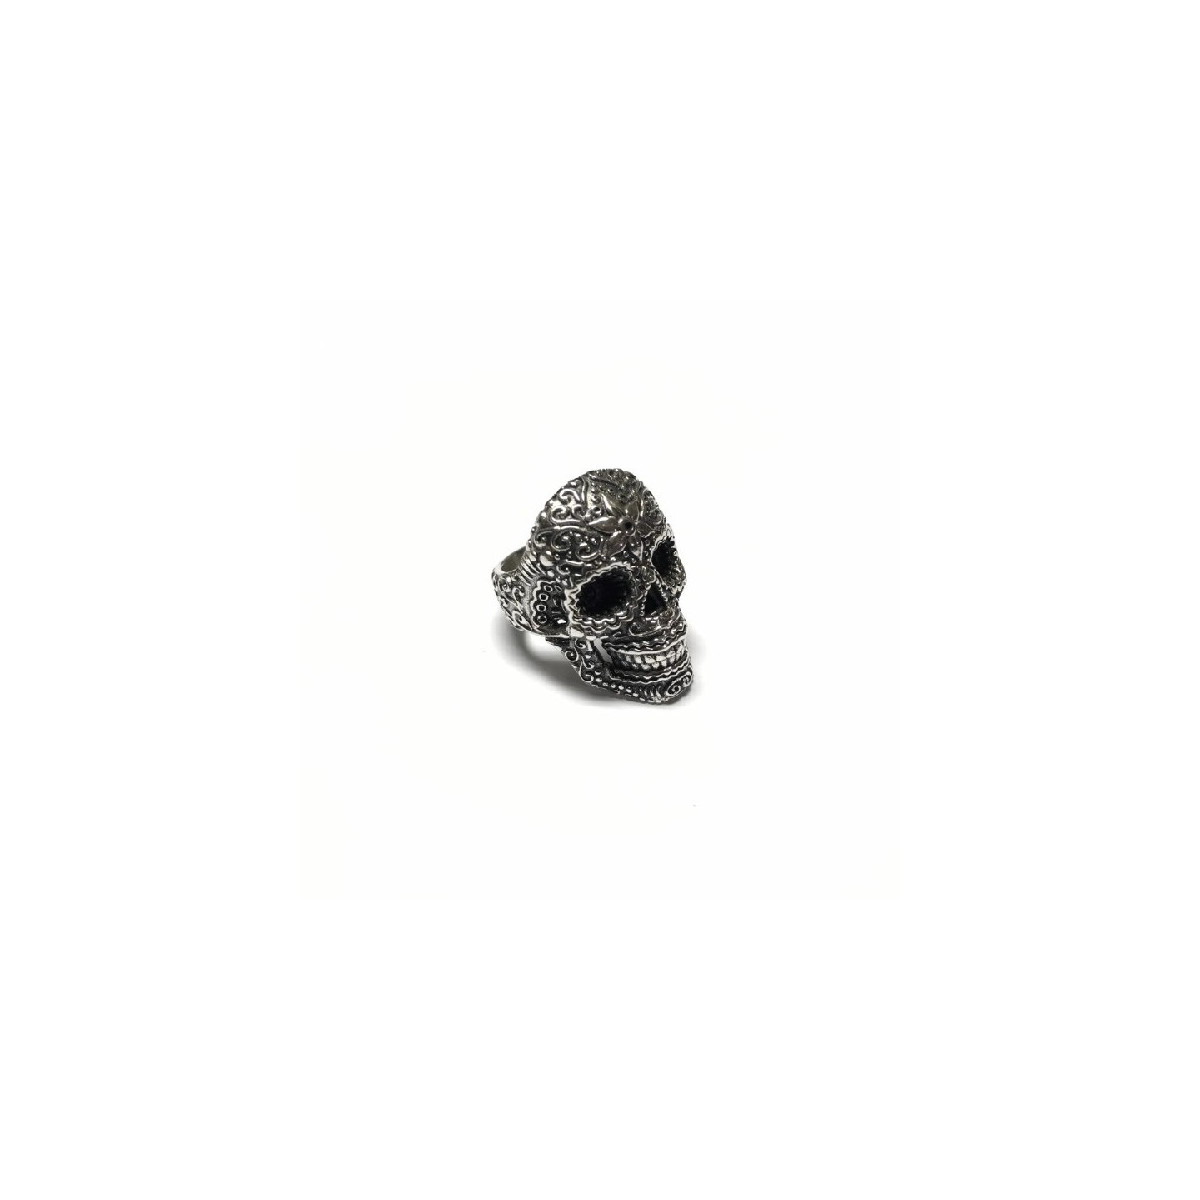 SKULL TOP SILVER RING - AN5476P